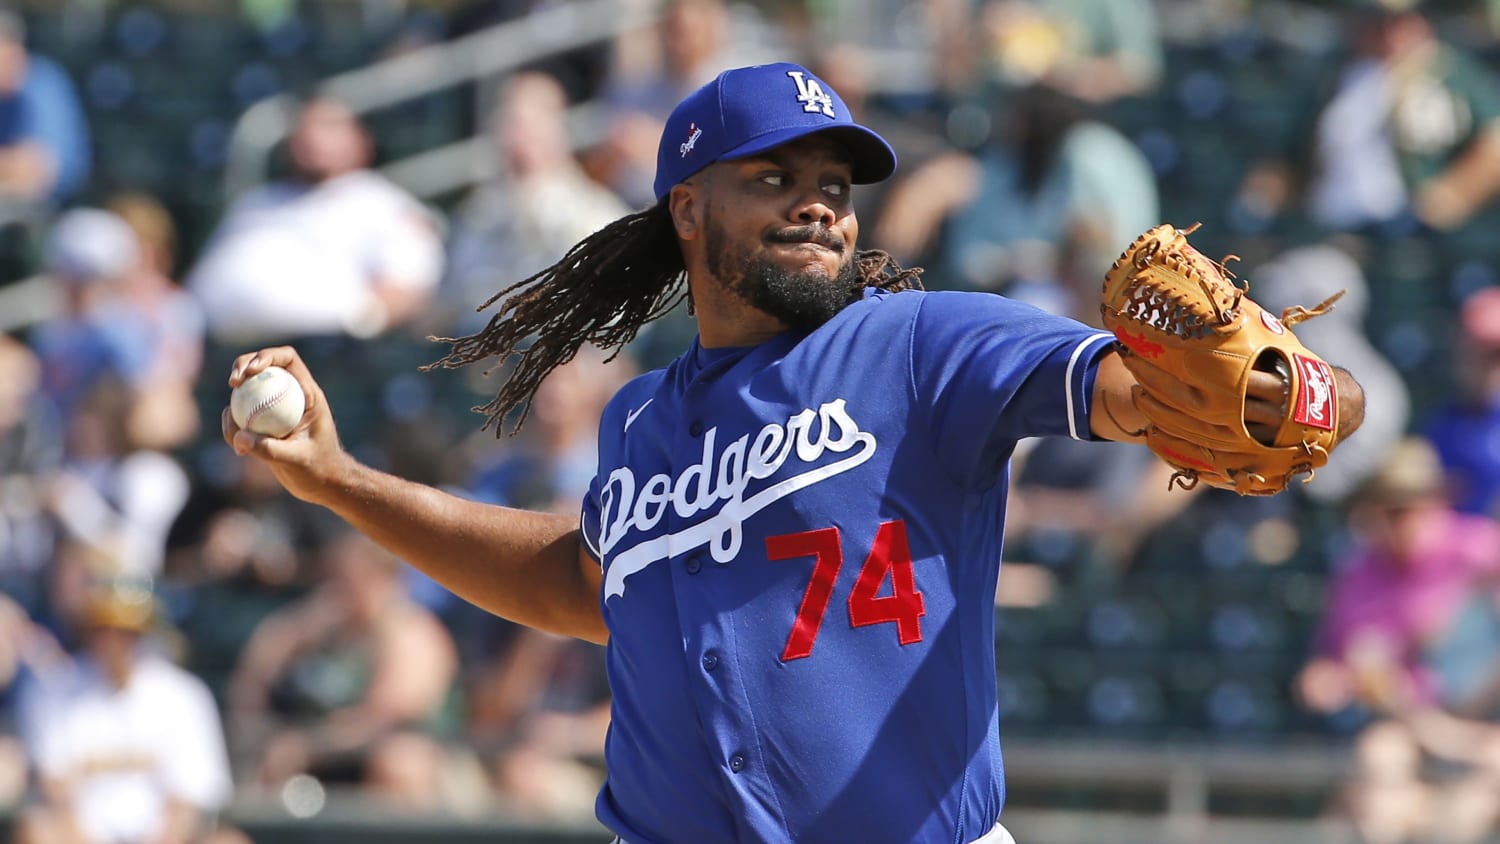 Dodgers closer Kenley Jansen reveals he and his family tested positive for coronavirus